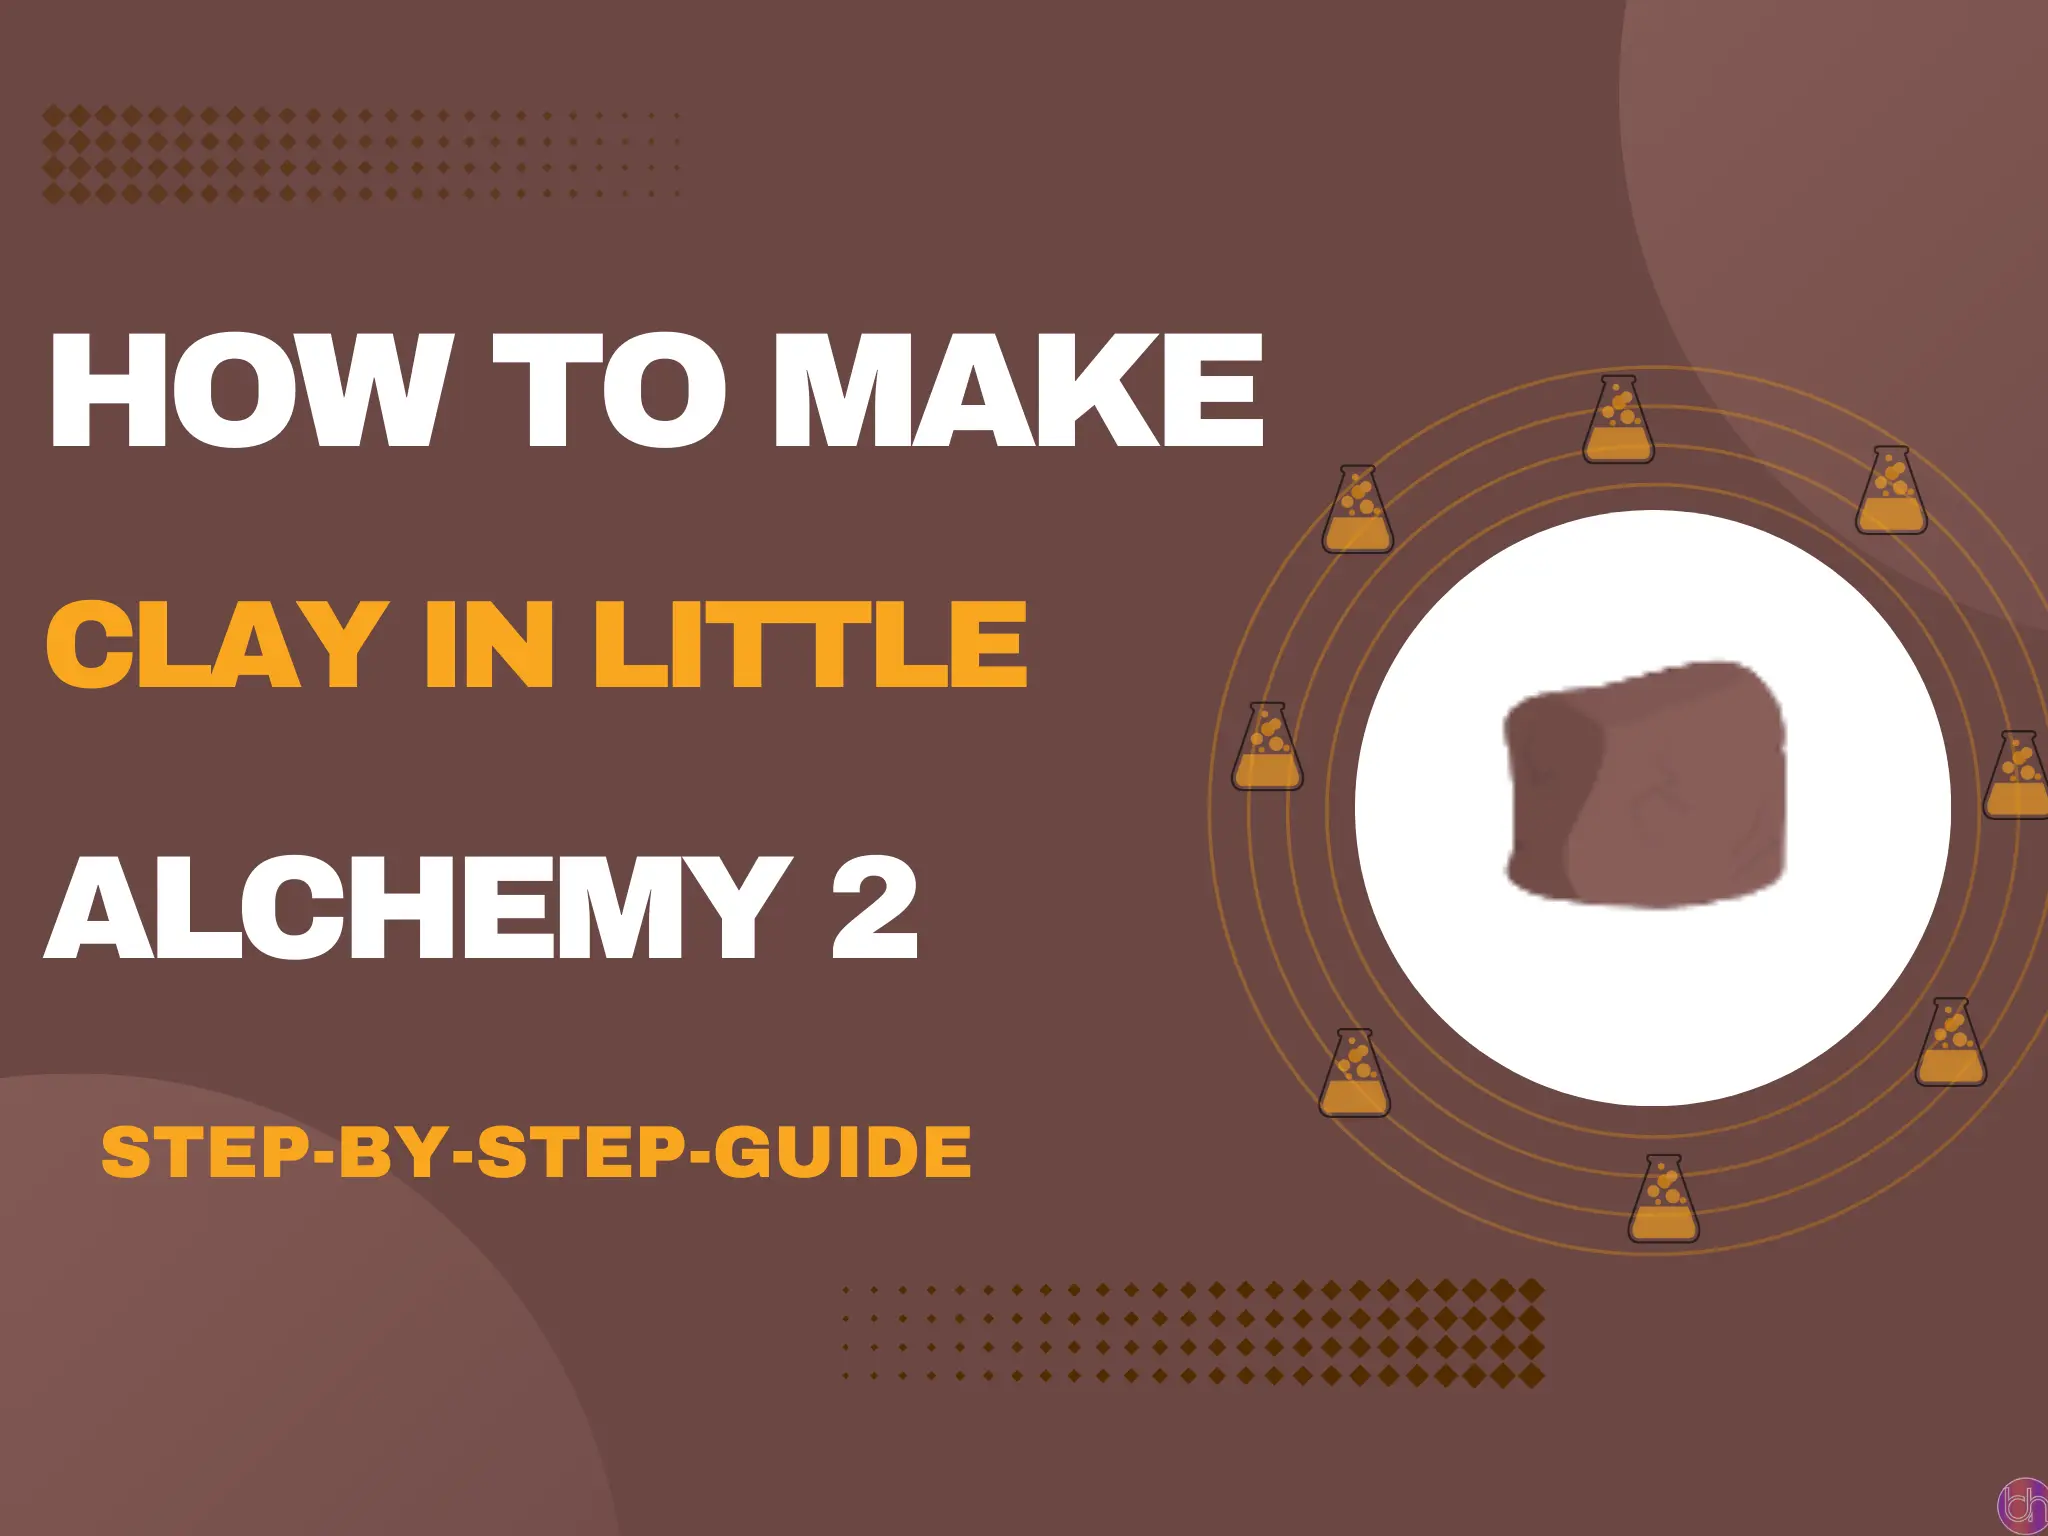 How to ,make Clay in little alchemy 2